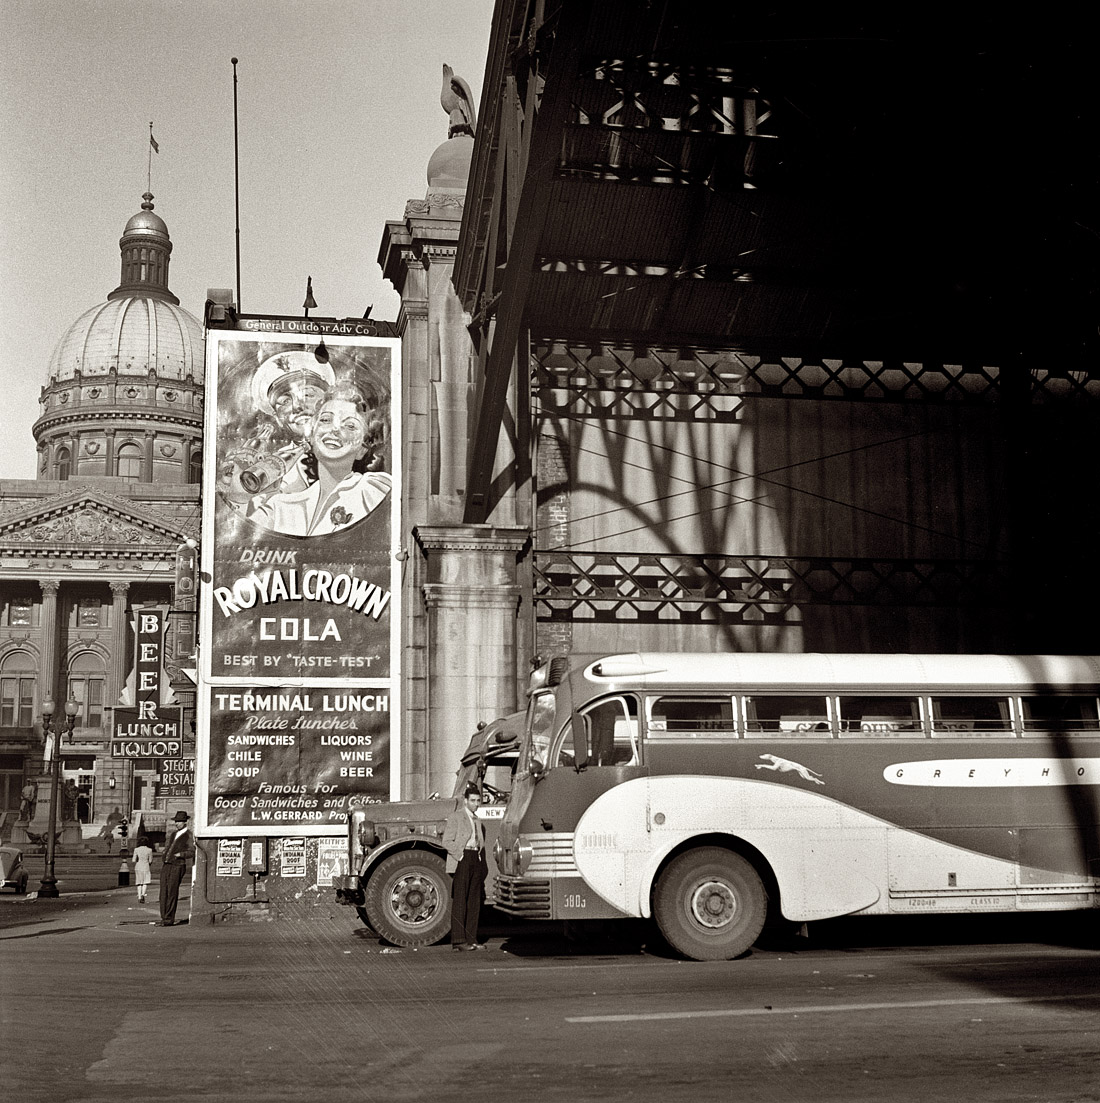 September 1943. "Greyhound bus station in Indianapolis." View full size. Medium-format negative by Esther Bubley for the Office of War Information.